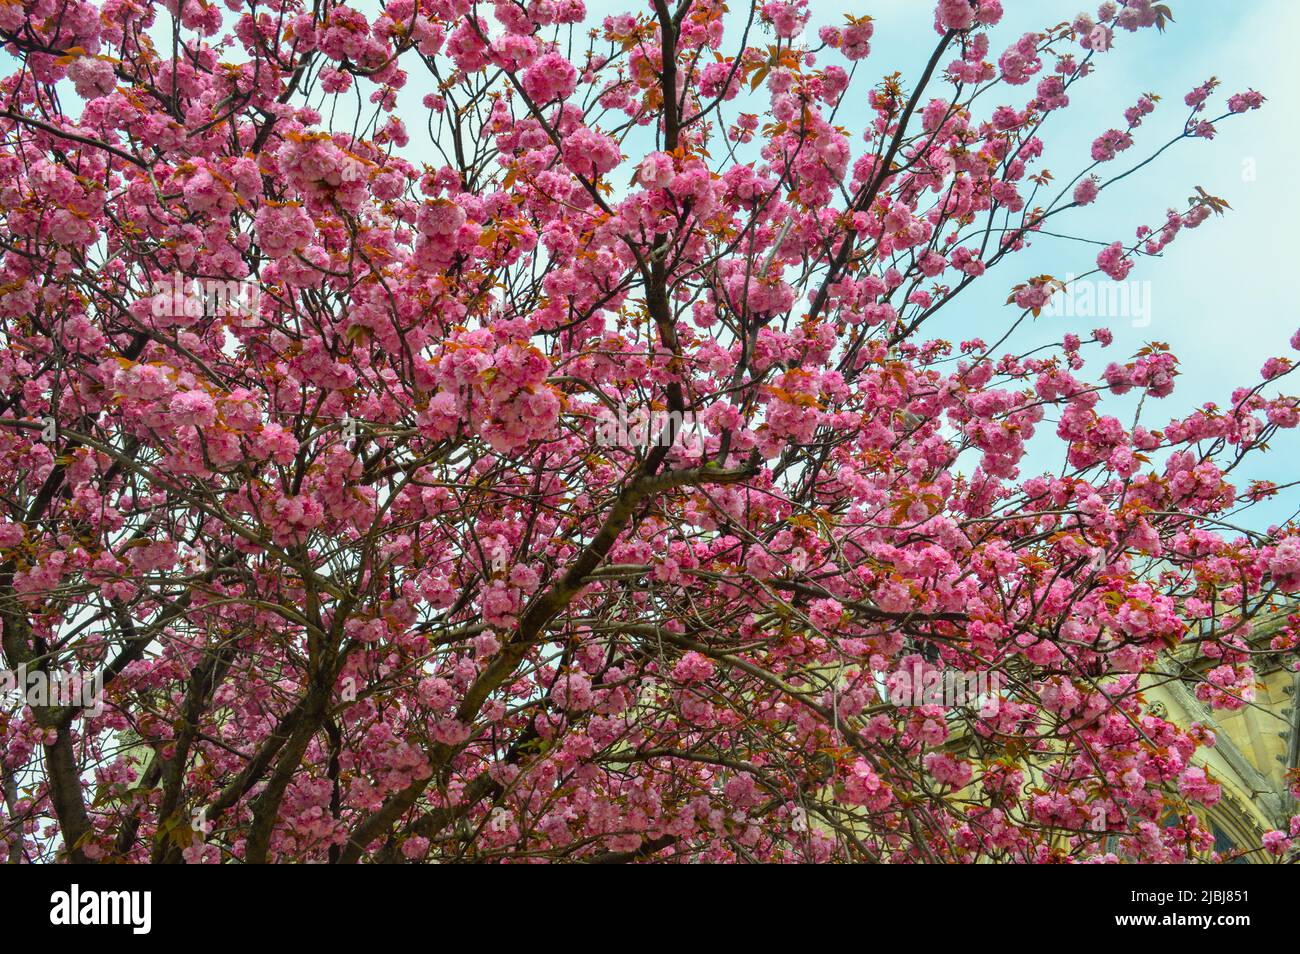 tree with pink flowers Stock Photo